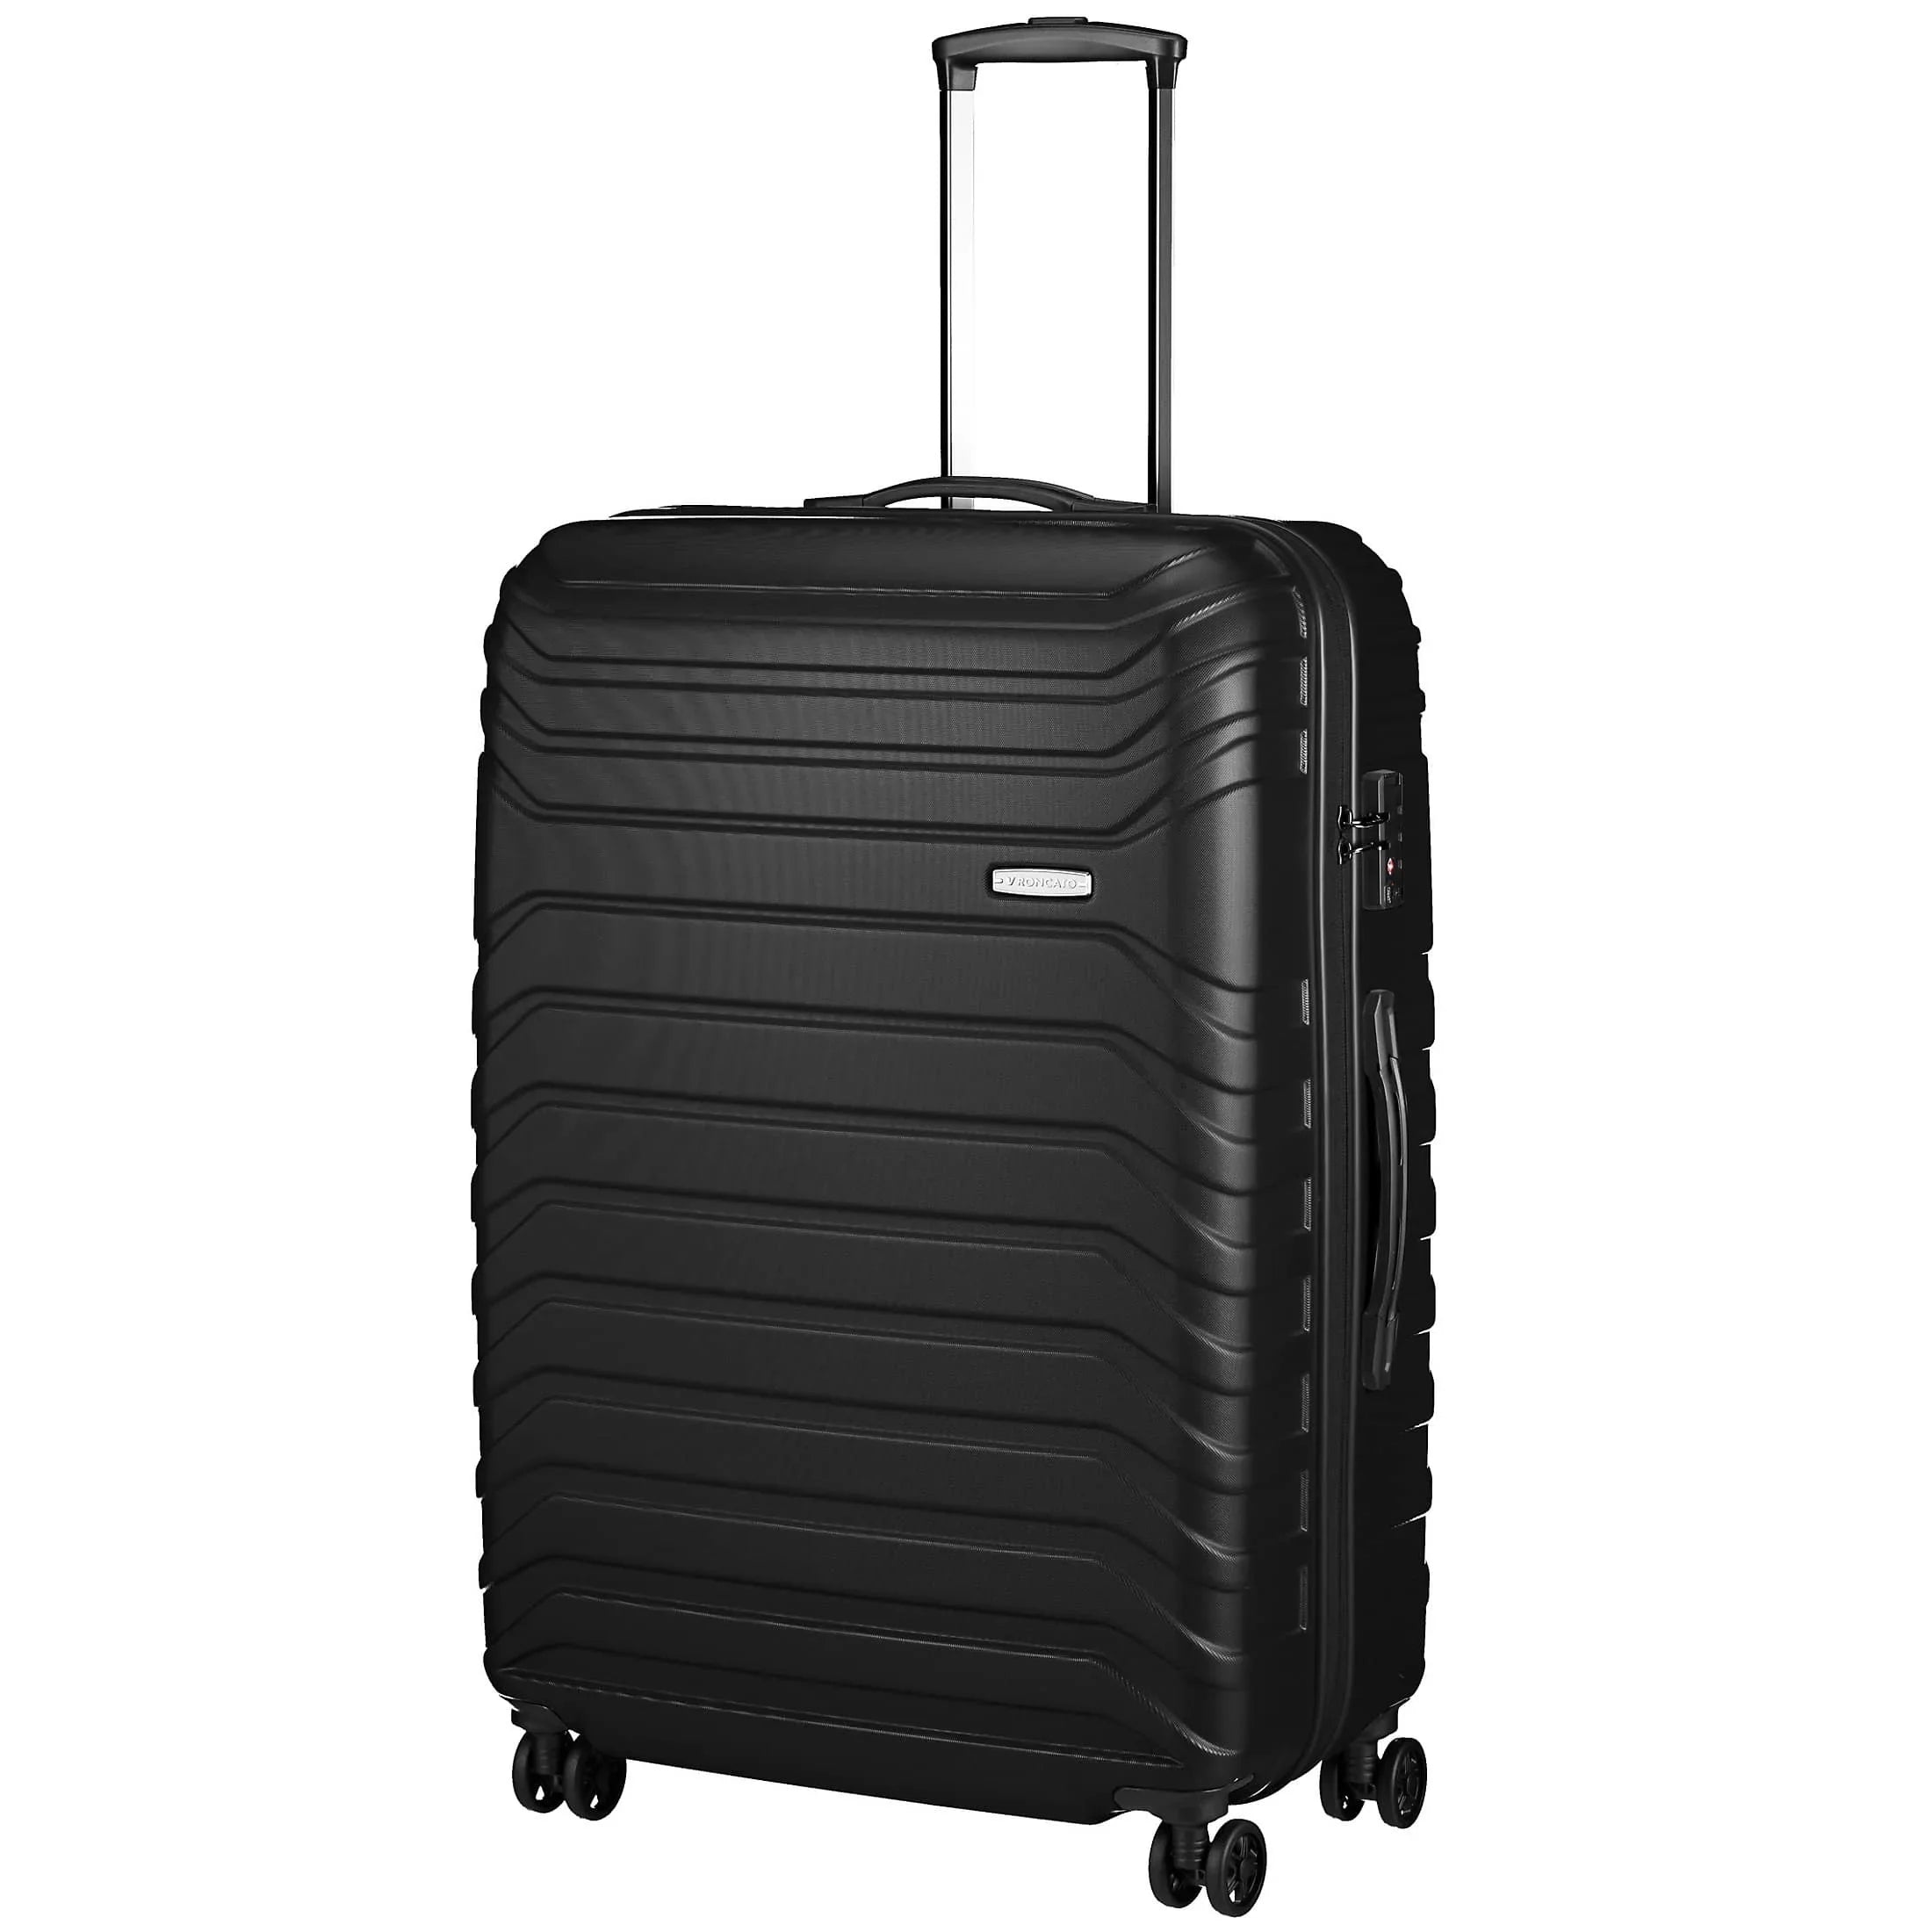 Roncato - and for modern from luggage – Italy! 2 business vacation Page